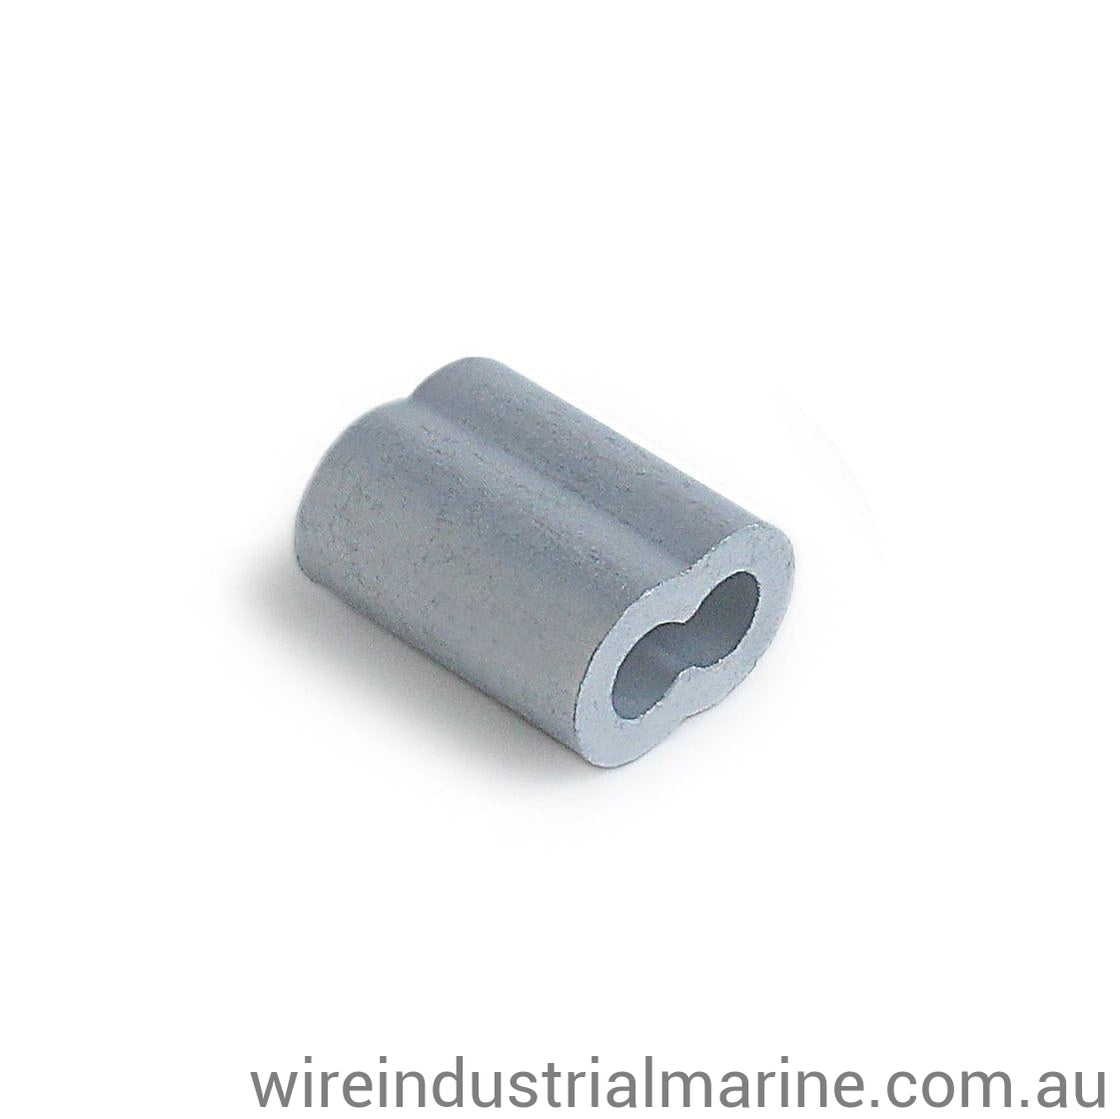 4mm Alloy swage for wire rope-AS-4.0-wireindustrialmarine